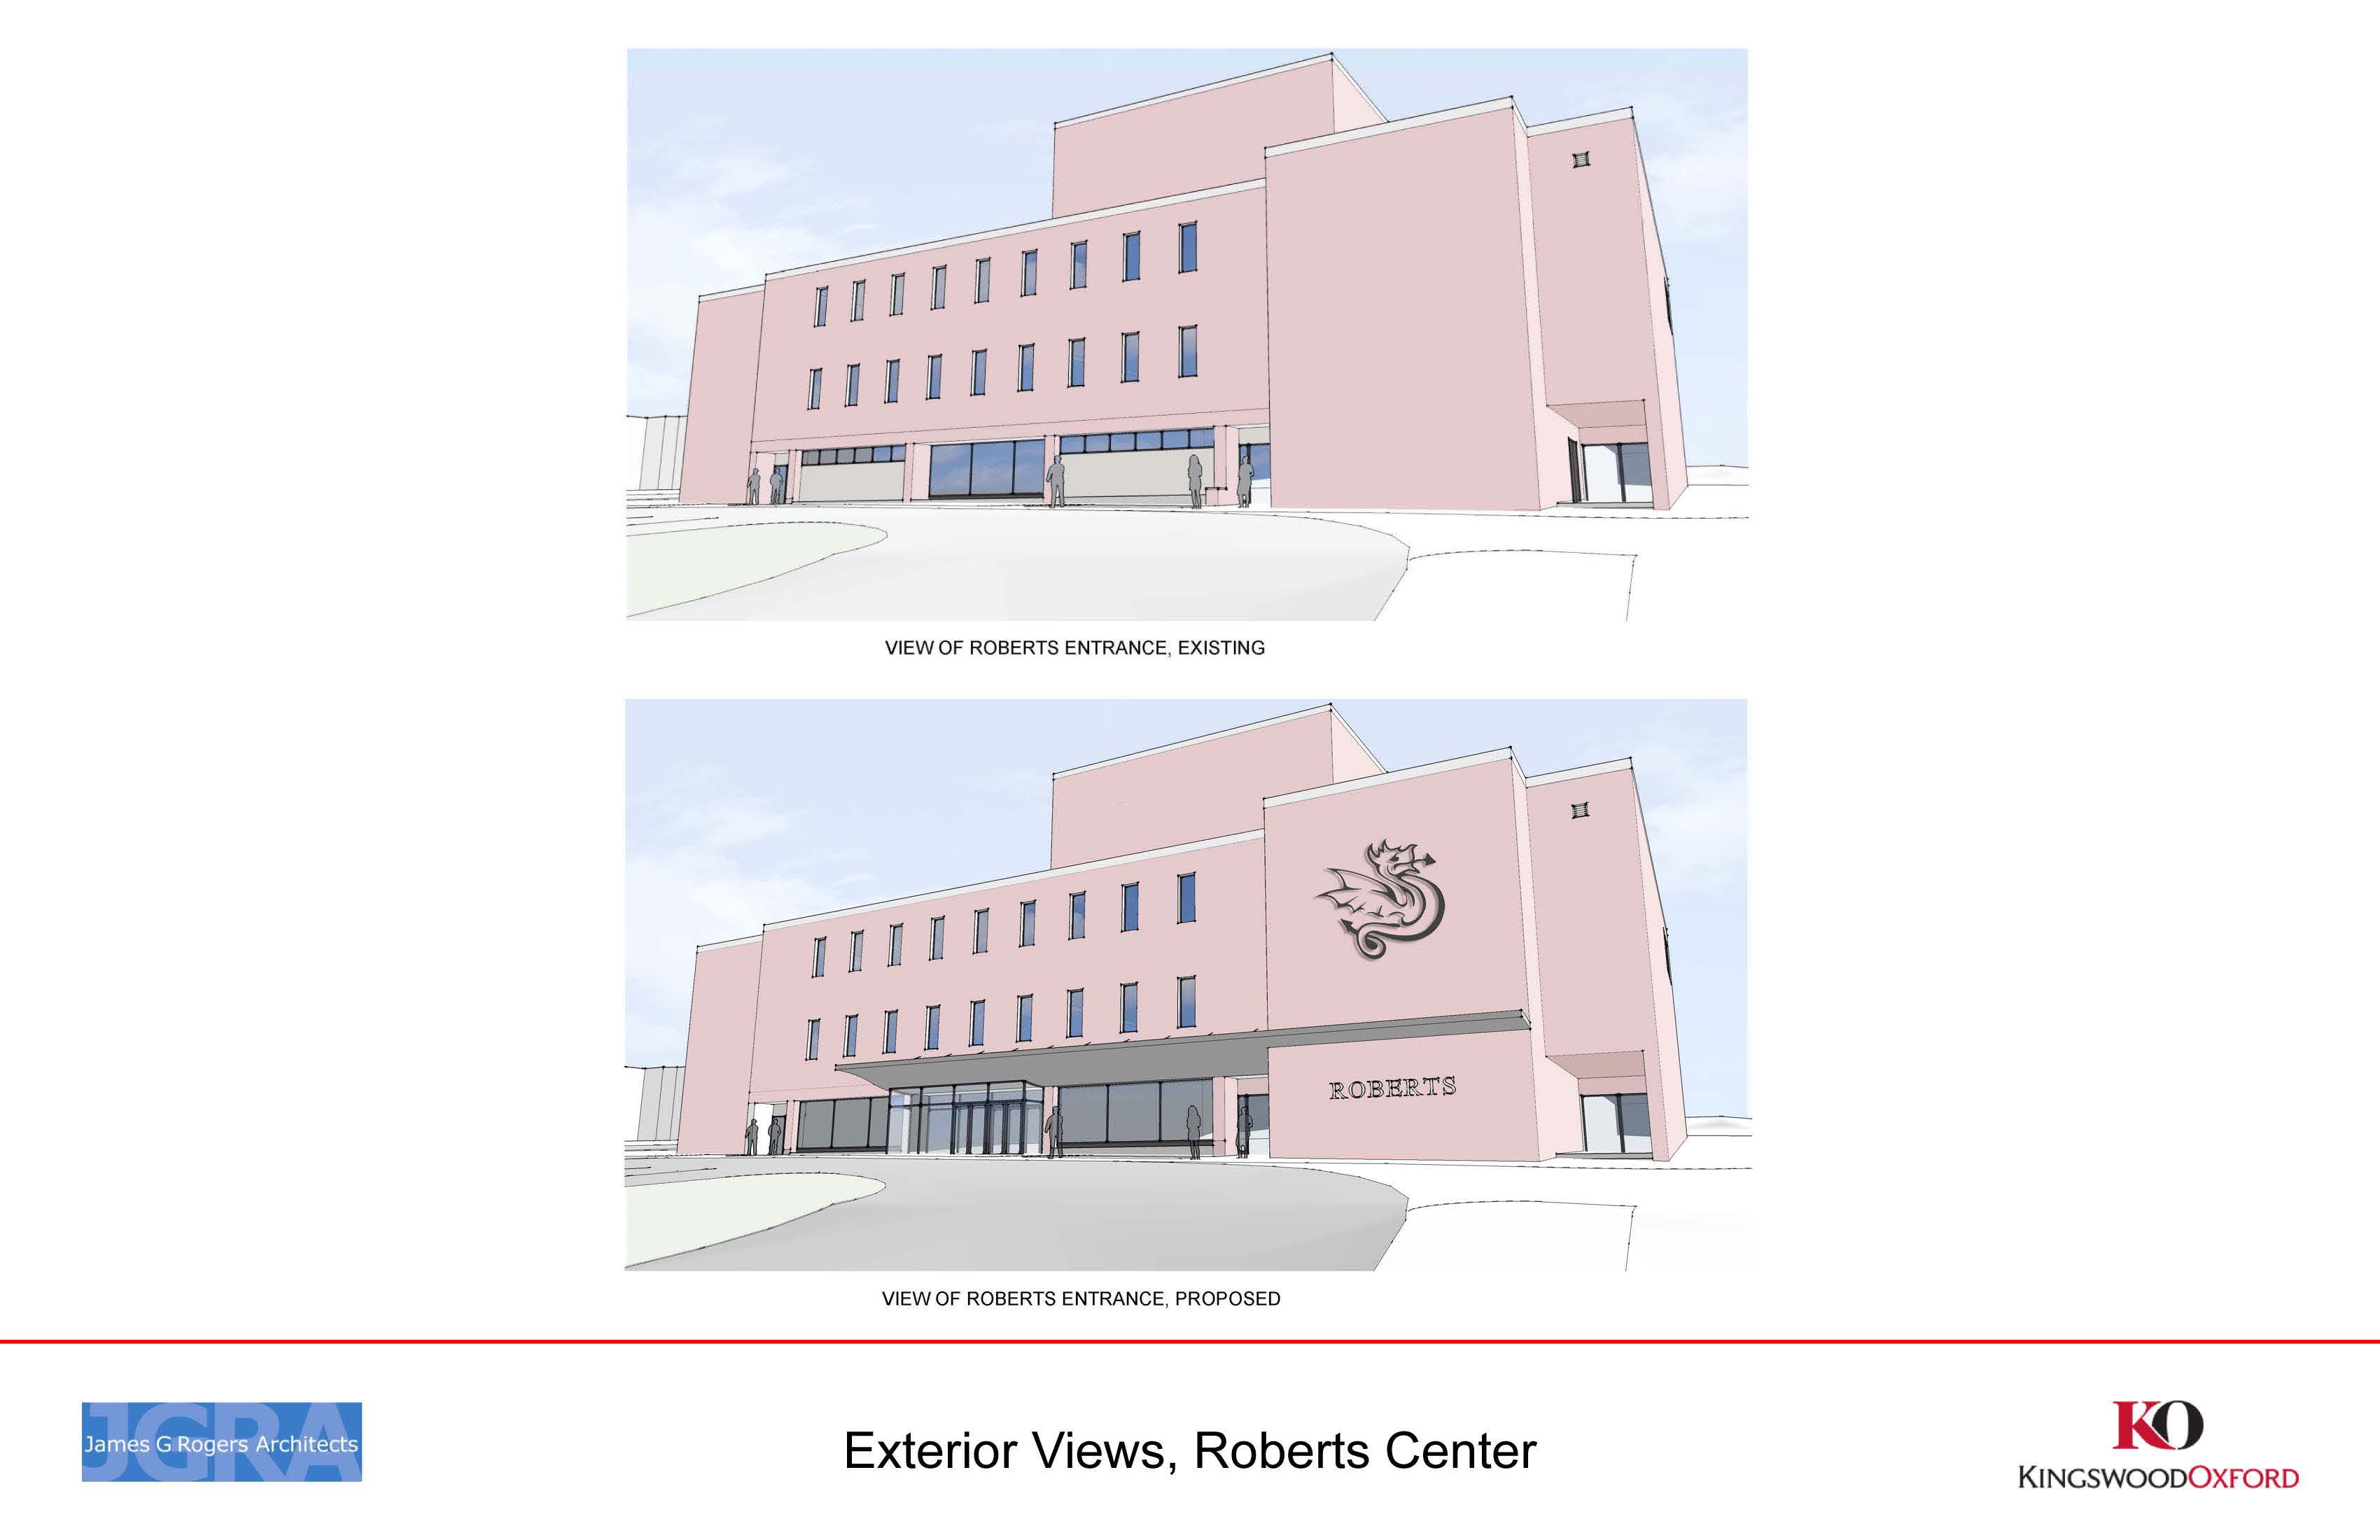 'Before and after' exterior views of Roberts Center. Image courtesy of Kingswood Oxford